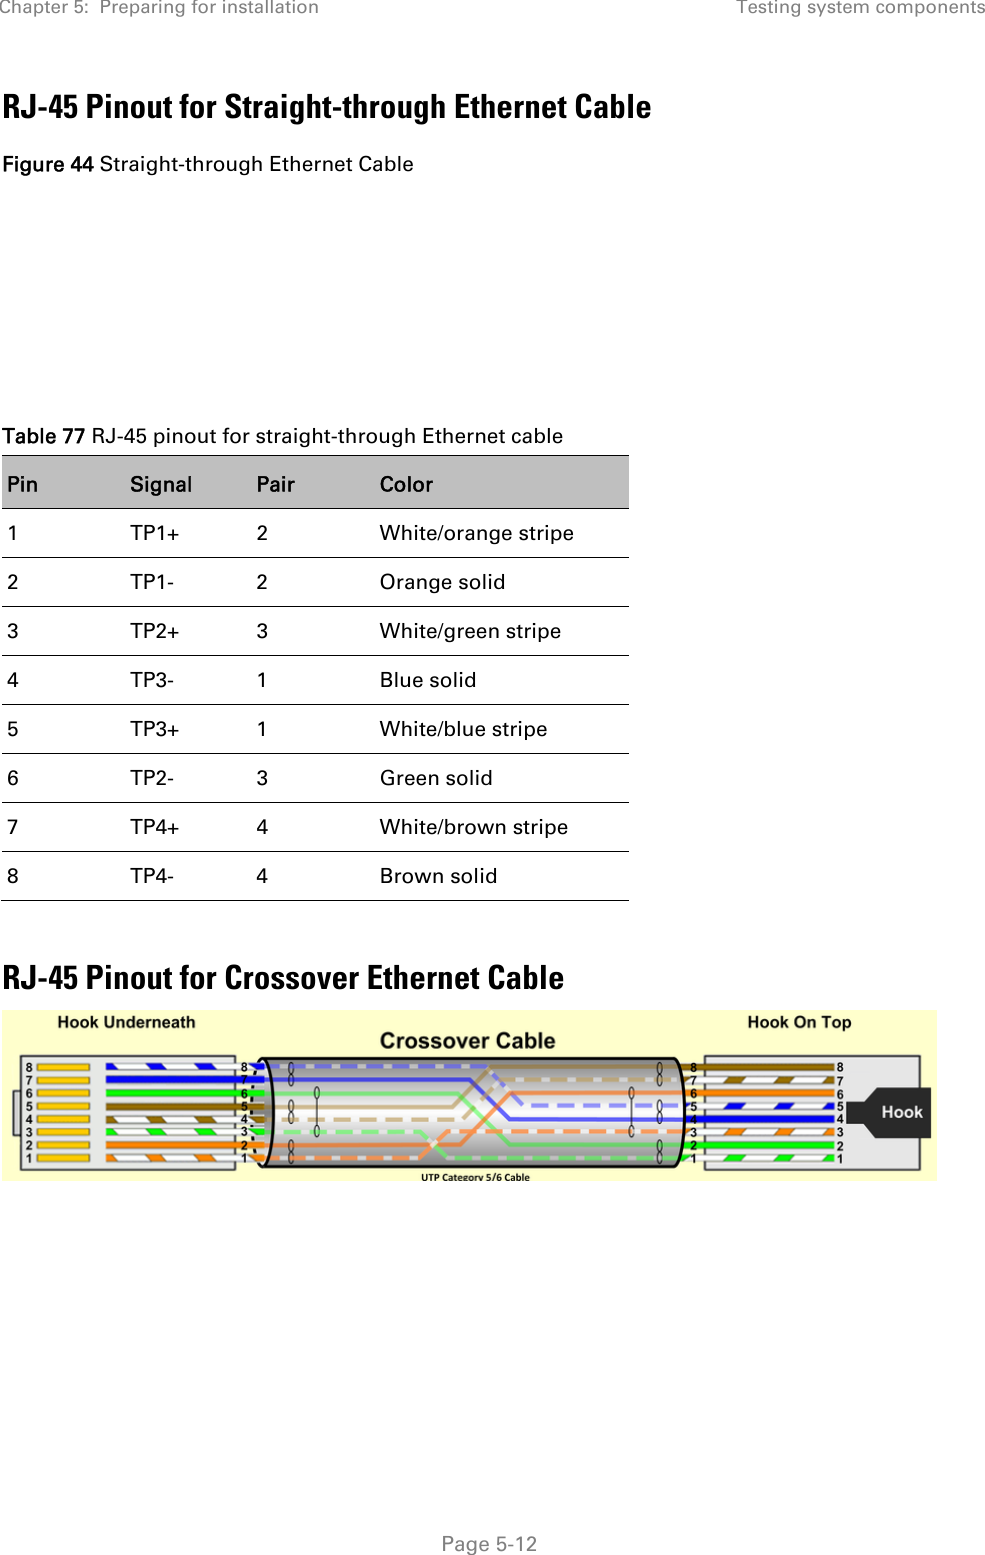 Chapter 5:  Preparing for installation  Testing system components   Page 5-12 RJ-45 Pinout for Straight-through Ethernet Cable Figure 44 Straight-through Ethernet Cable  Table 77 RJ-45 pinout for straight-through Ethernet cable Pin  Signal  Pair  Color 1 TP1+ 2 White/orange stripe 2 TP1- 2 Orange solid 3 TP2+ 3 White/green stripe 4 TP3- 1 Blue solid 5 TP3+ 1 White/blue stripe 6 TP2- 3 Green solid 7 TP4+ 4 White/brown stripe 8 TP4- 4 Brown solid  RJ-45 Pinout for Crossover Ethernet Cable    